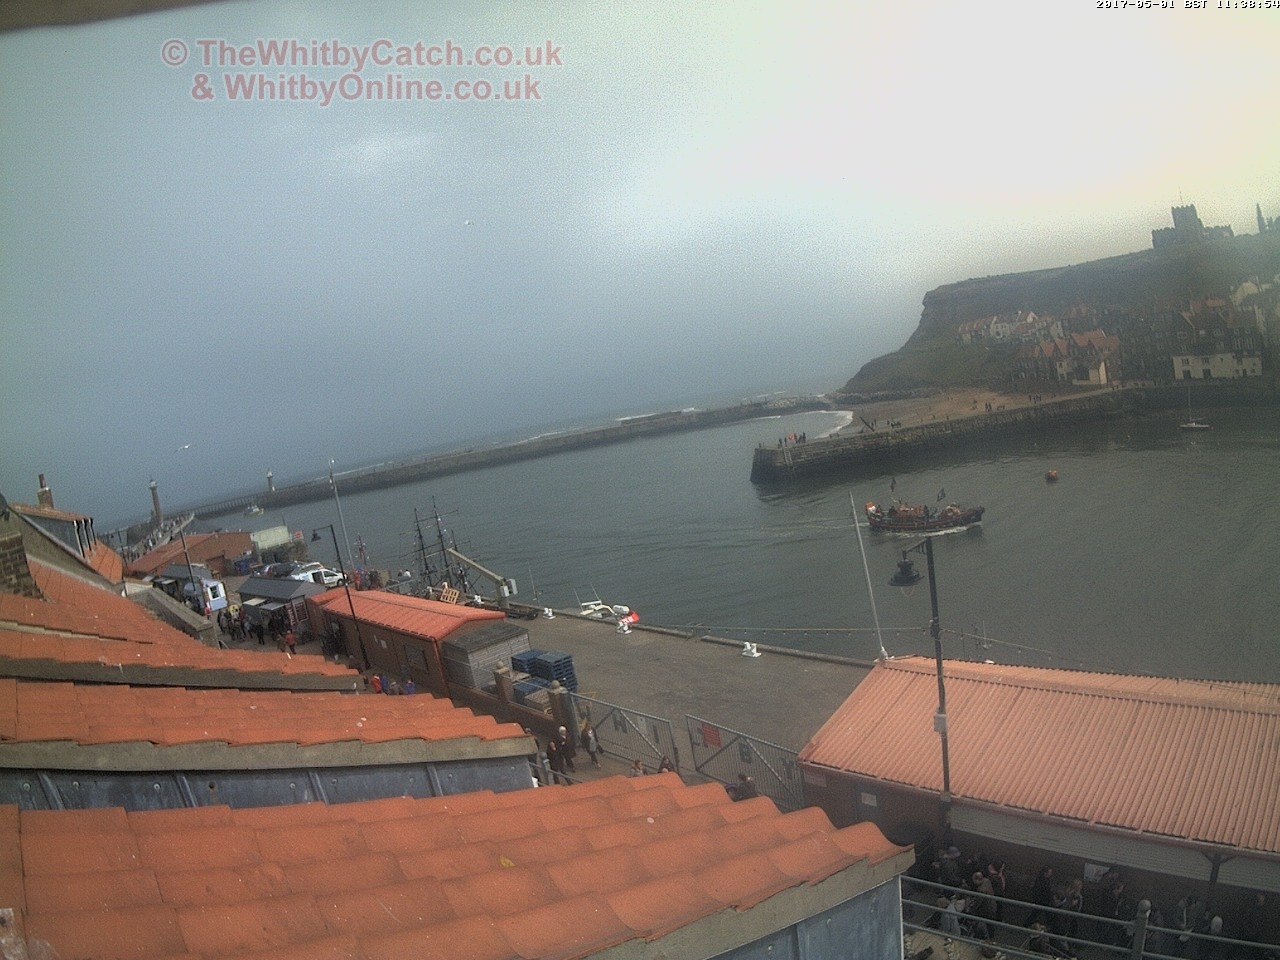 Whitby Mon 1st May 2017 11:39.